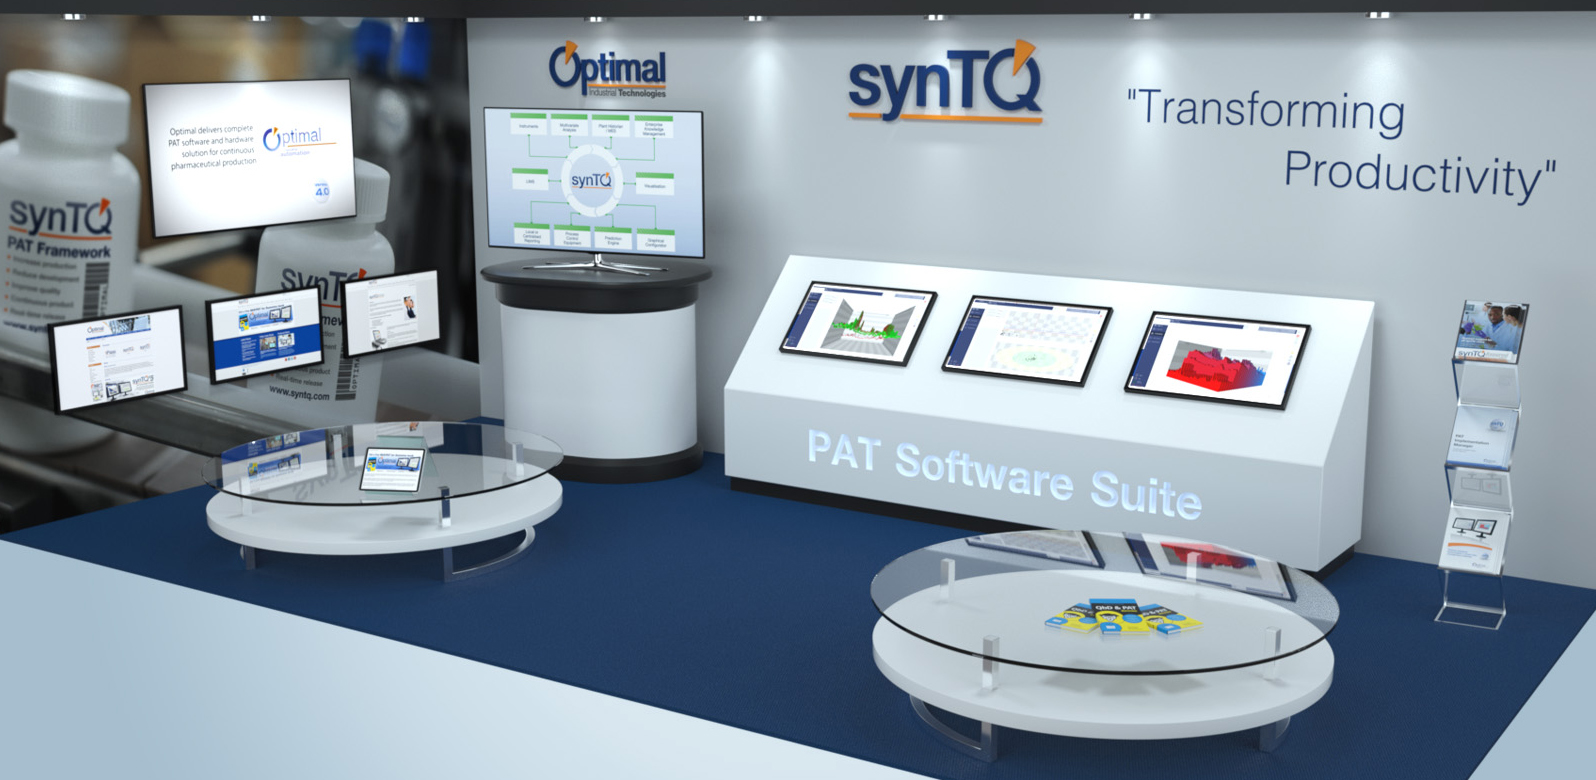 To provide information to customers globally, Optimal Industrial Technologies has unveiled a new virtual exhibition stand, which is hosted at IndustryExpo – the world’s first truly virtual exhibition.